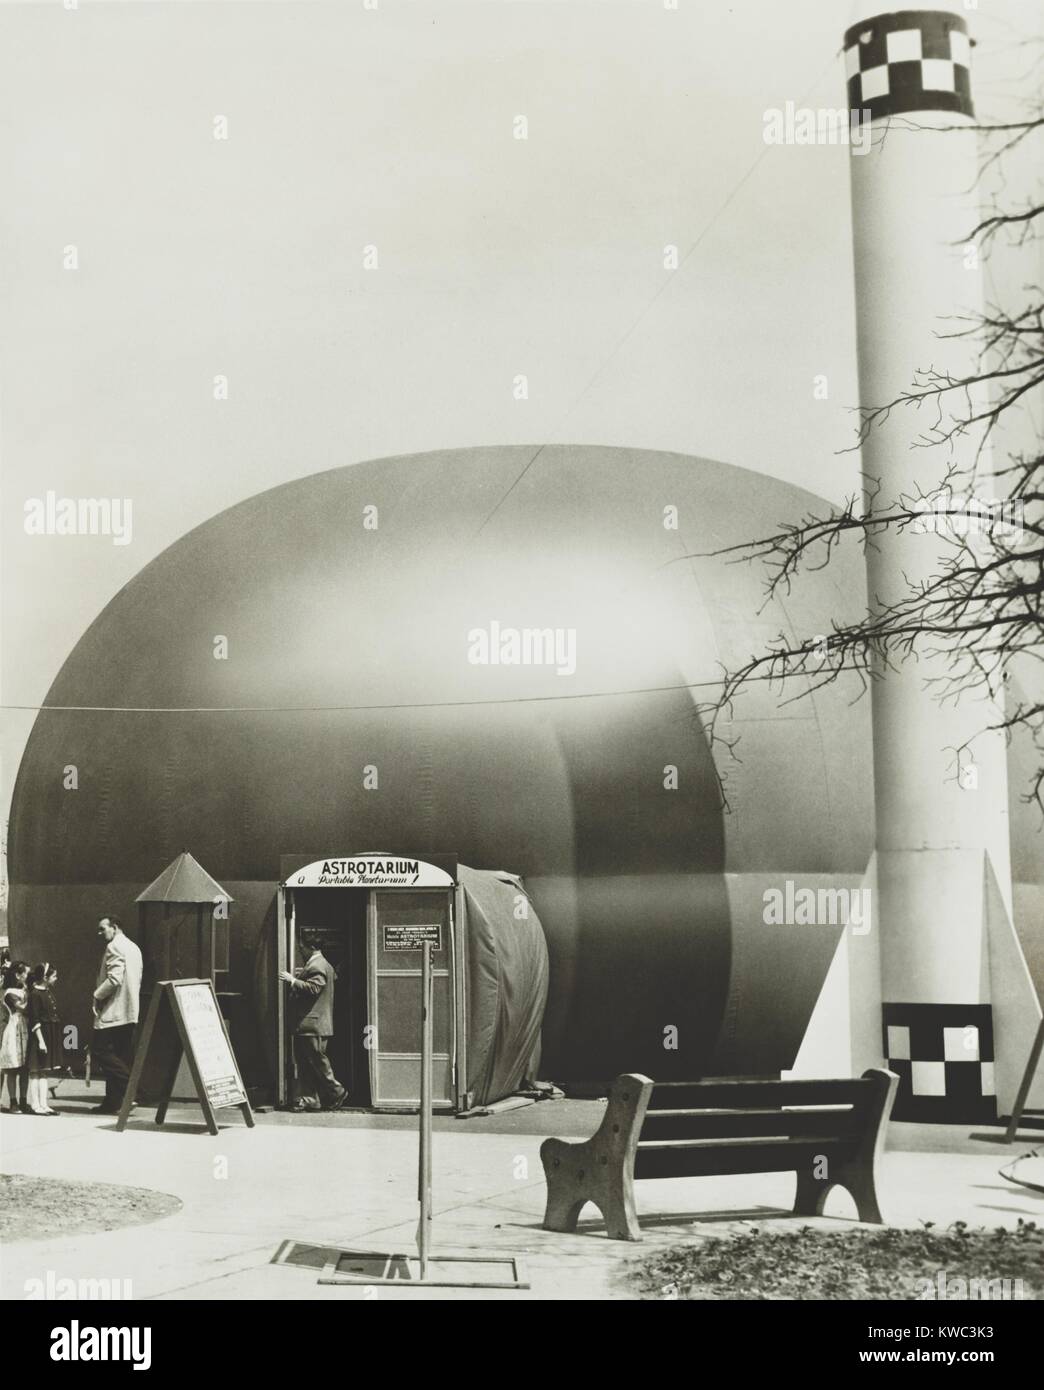 Astrotarium, a portable planetarium, at Abraham & Straus store in Babylon, Long Island, New York. March 31, 1951. The space age science exhibit was set up in a parking lot at the Great South Bay Shopping Center. (BSLOC 2015 14 128) Stock Photo